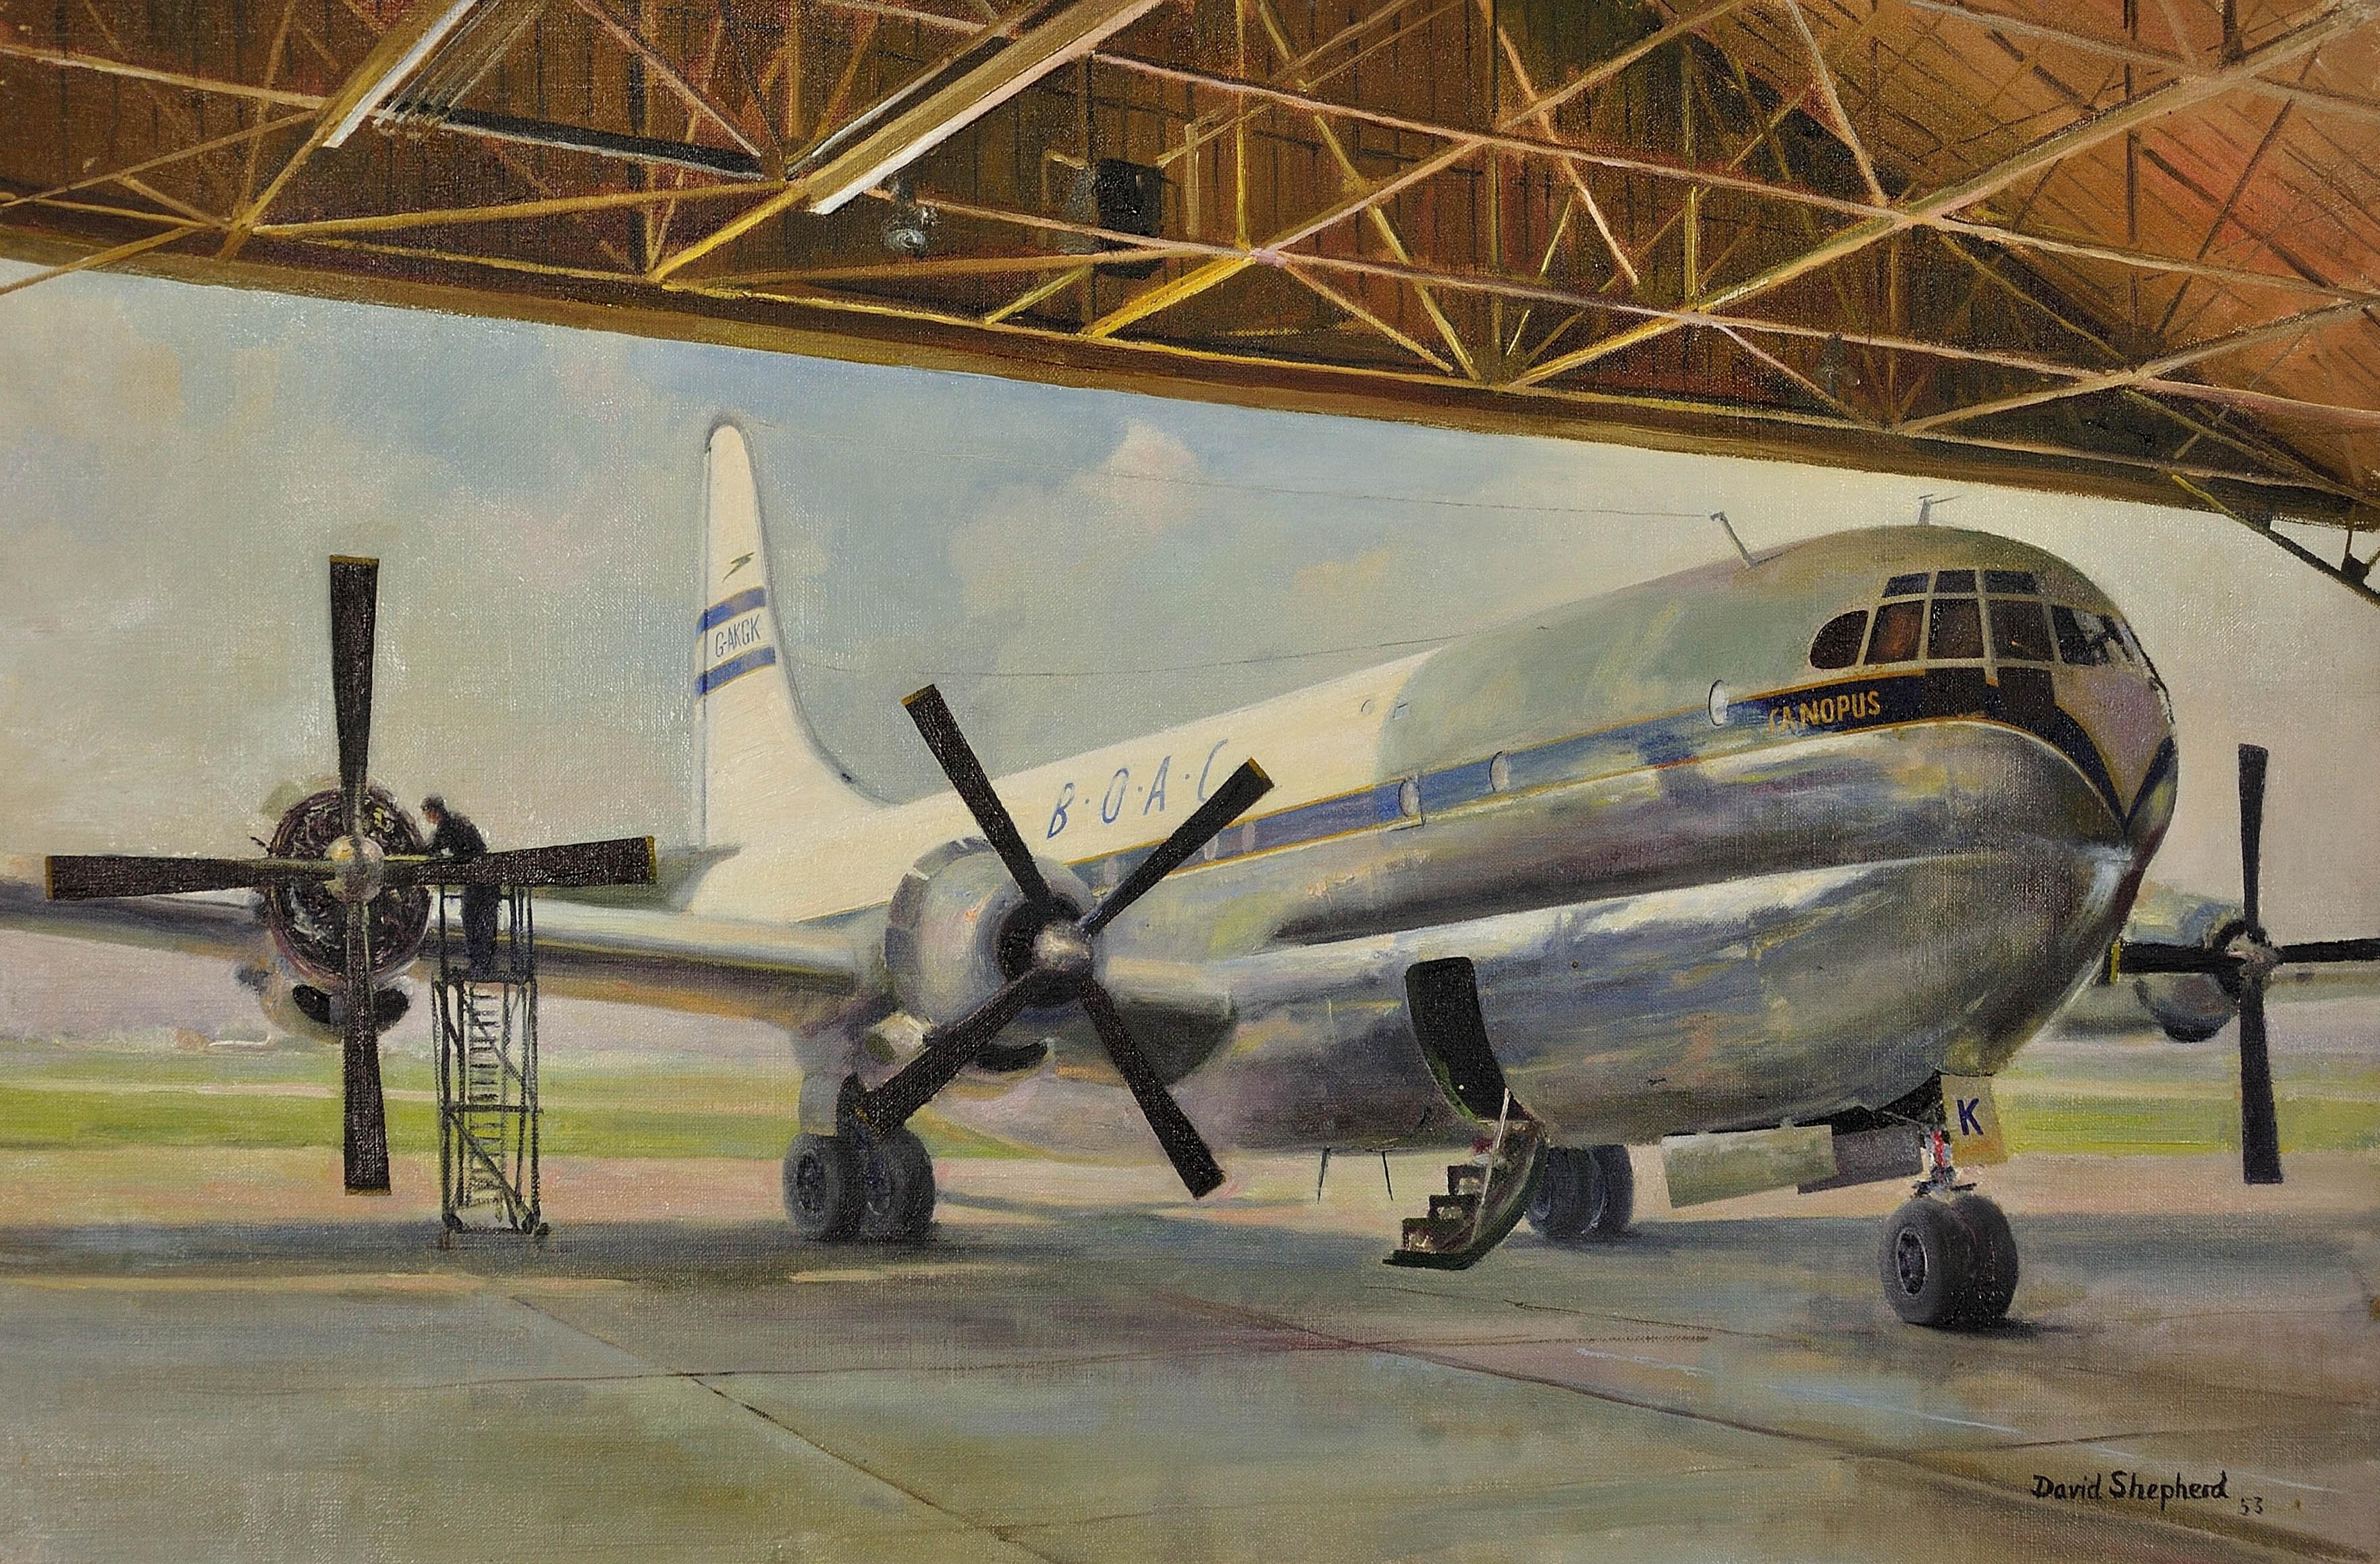 Giant Refreshed, 1953. BOAC Boeing 377 Stratocruiser, Canopus.Aircraft Aviation. - Painting by David Shepherd